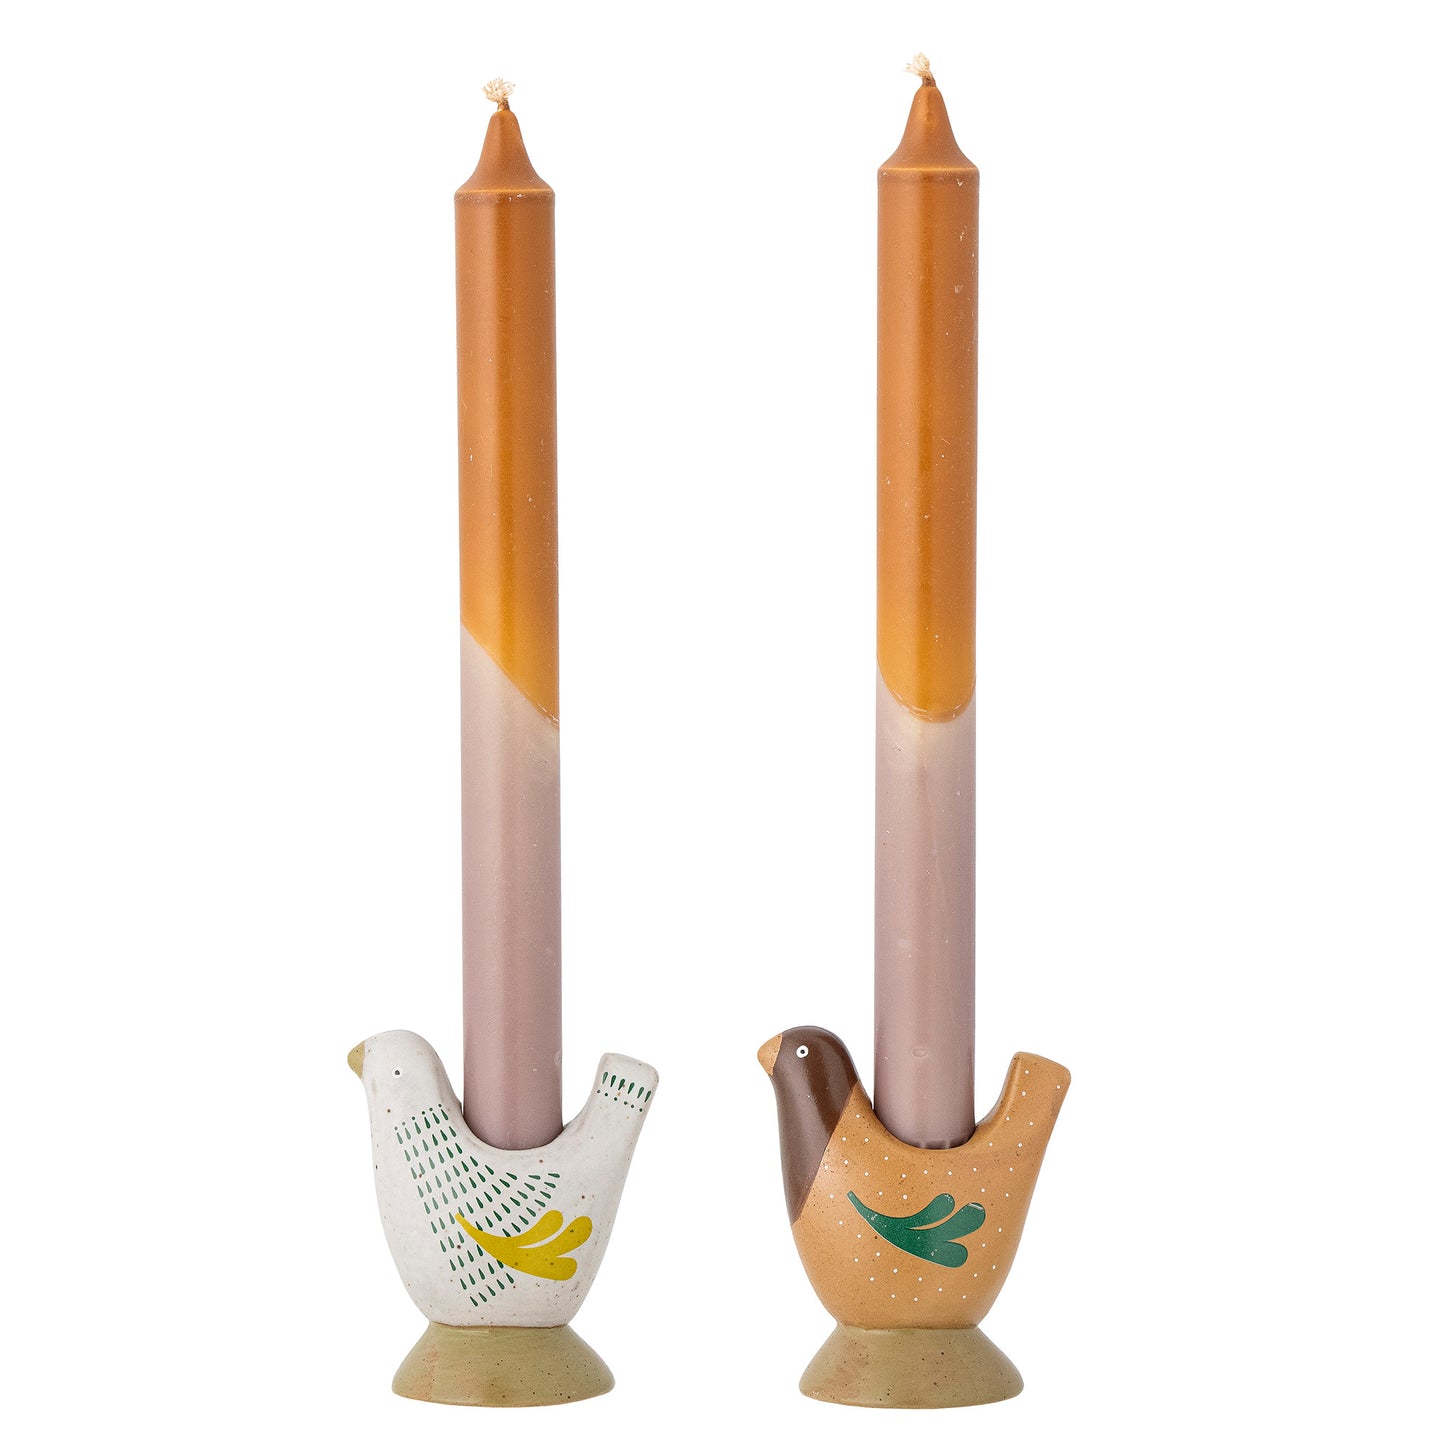 Reem Candle Holder - 2 Styles